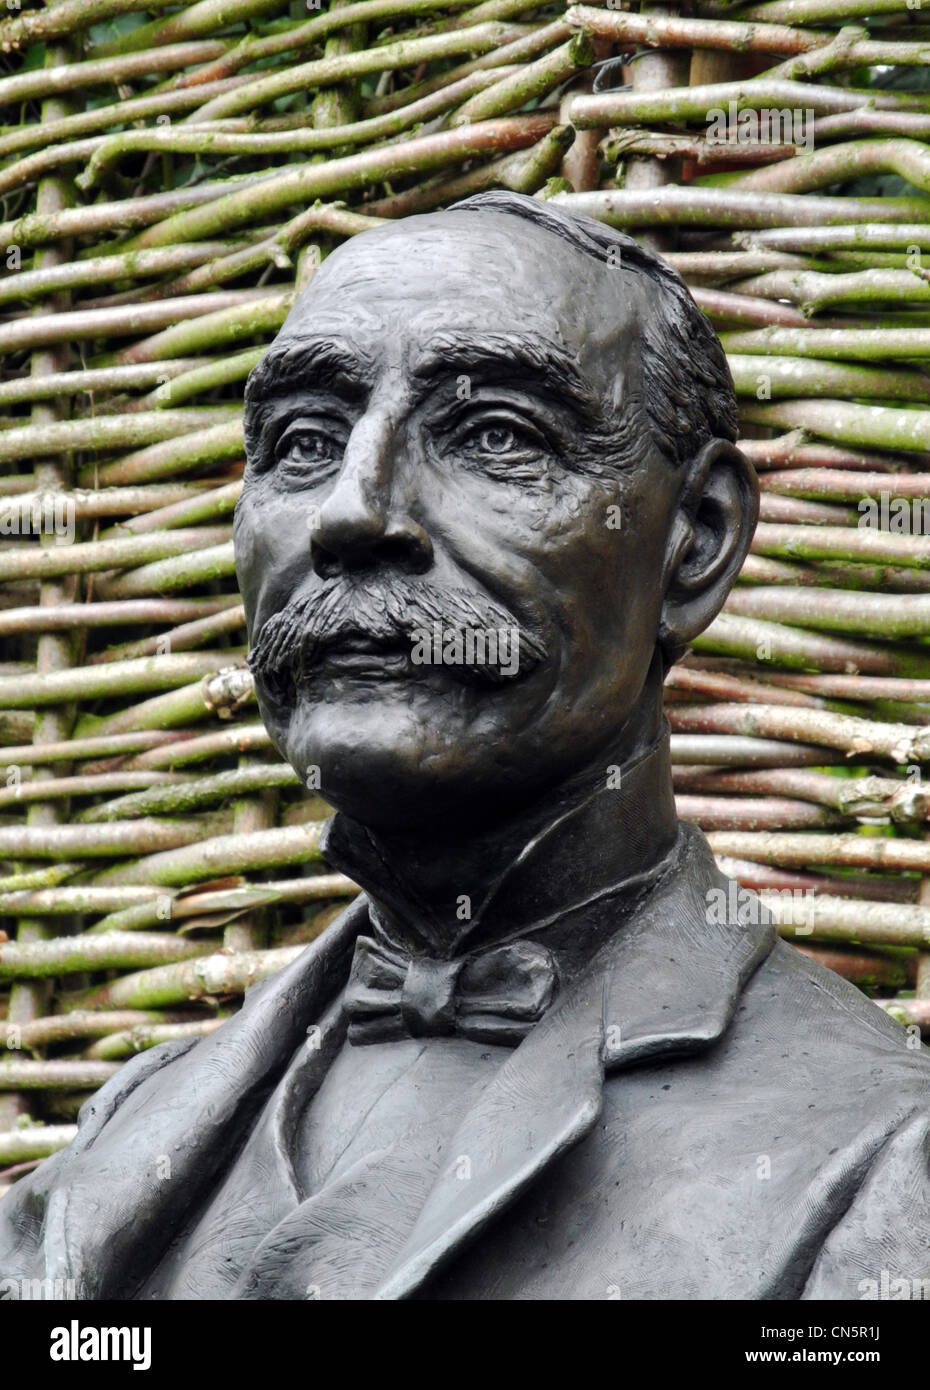 Statue of Edward Elgar in the garden the birthplace of composer Sir Edward Elgar Firs cottage in Lower Broadheath Worcestershire Stock Photo